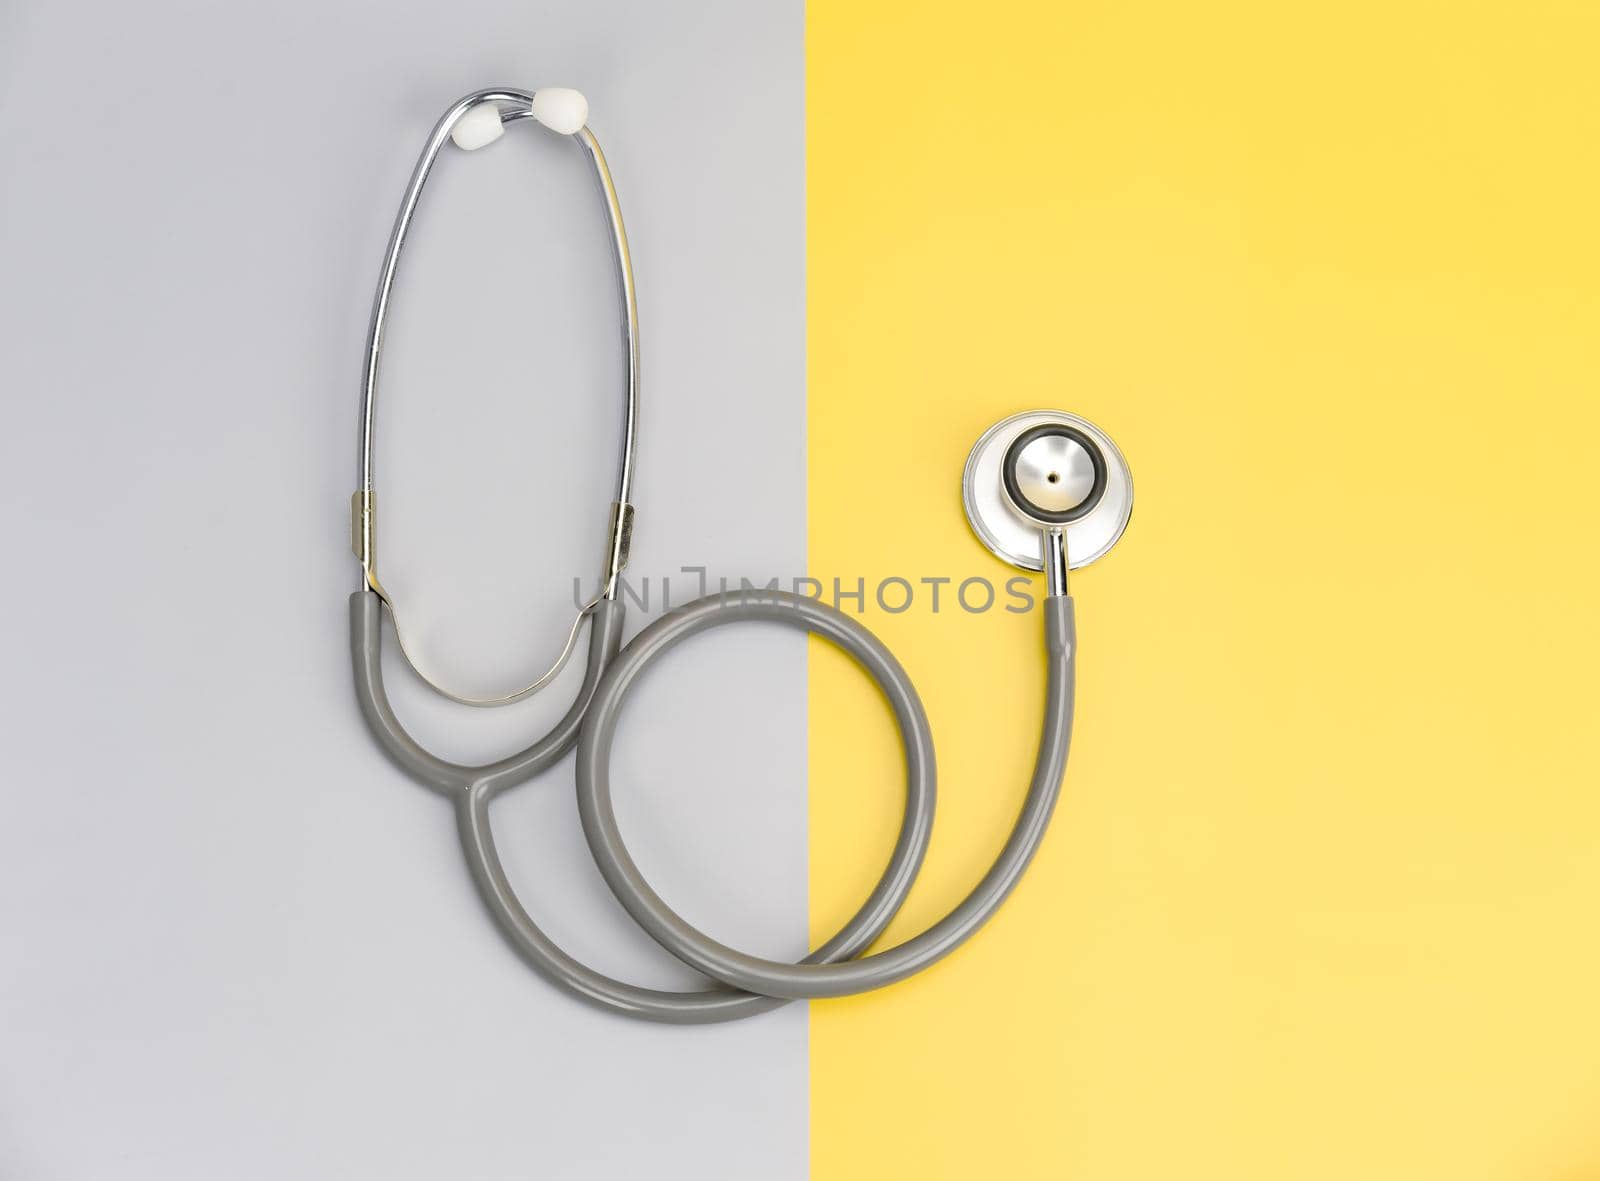 Stethoscope for doctor and copy space on color background by Buttus_casso